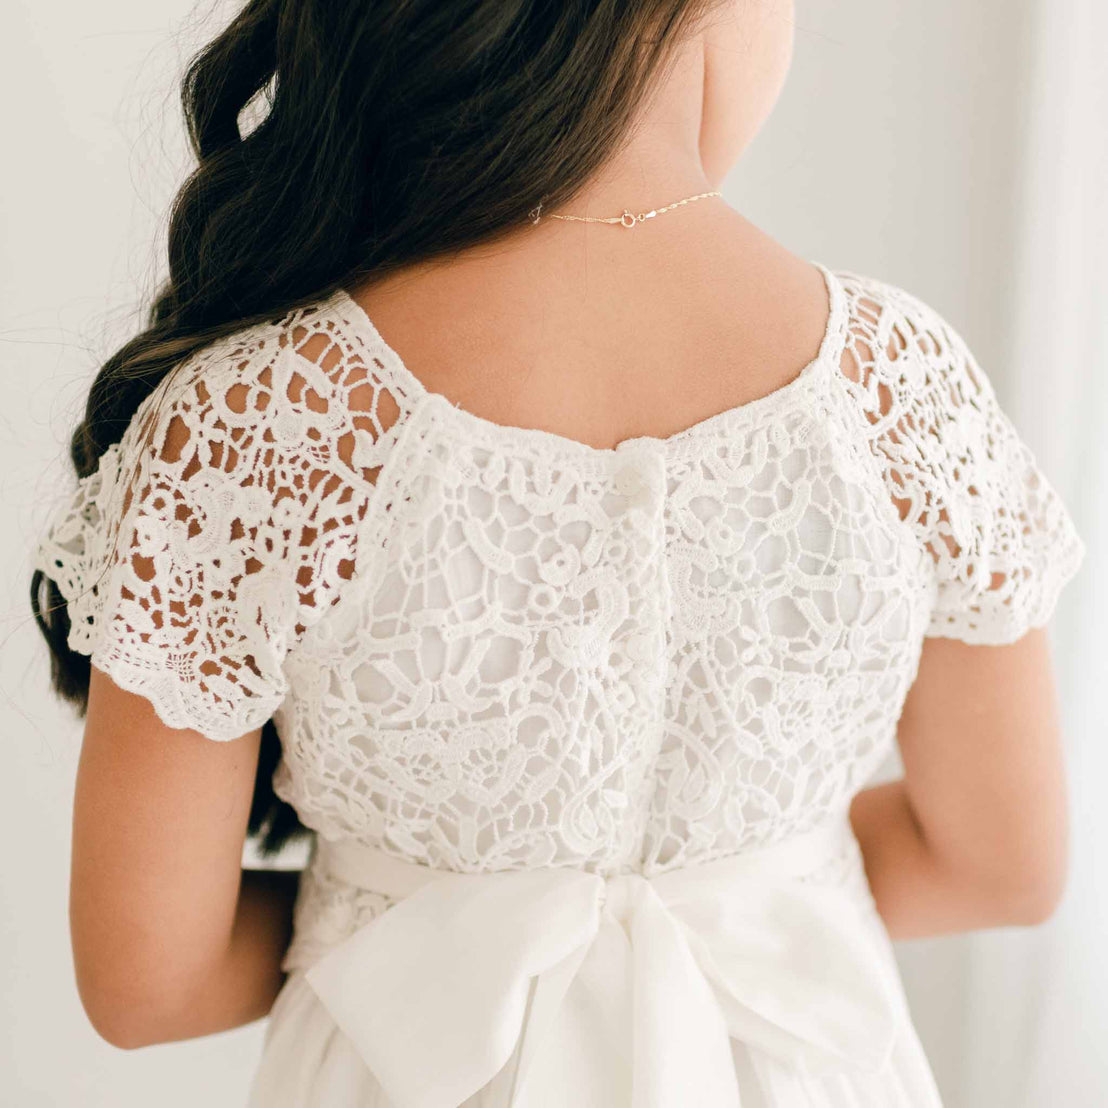 Girl photographed from behind, showcasing the detailed lace design of a white Grace Girls Lace First Communion Dress with short sleeves and a ribbon-tied waist.